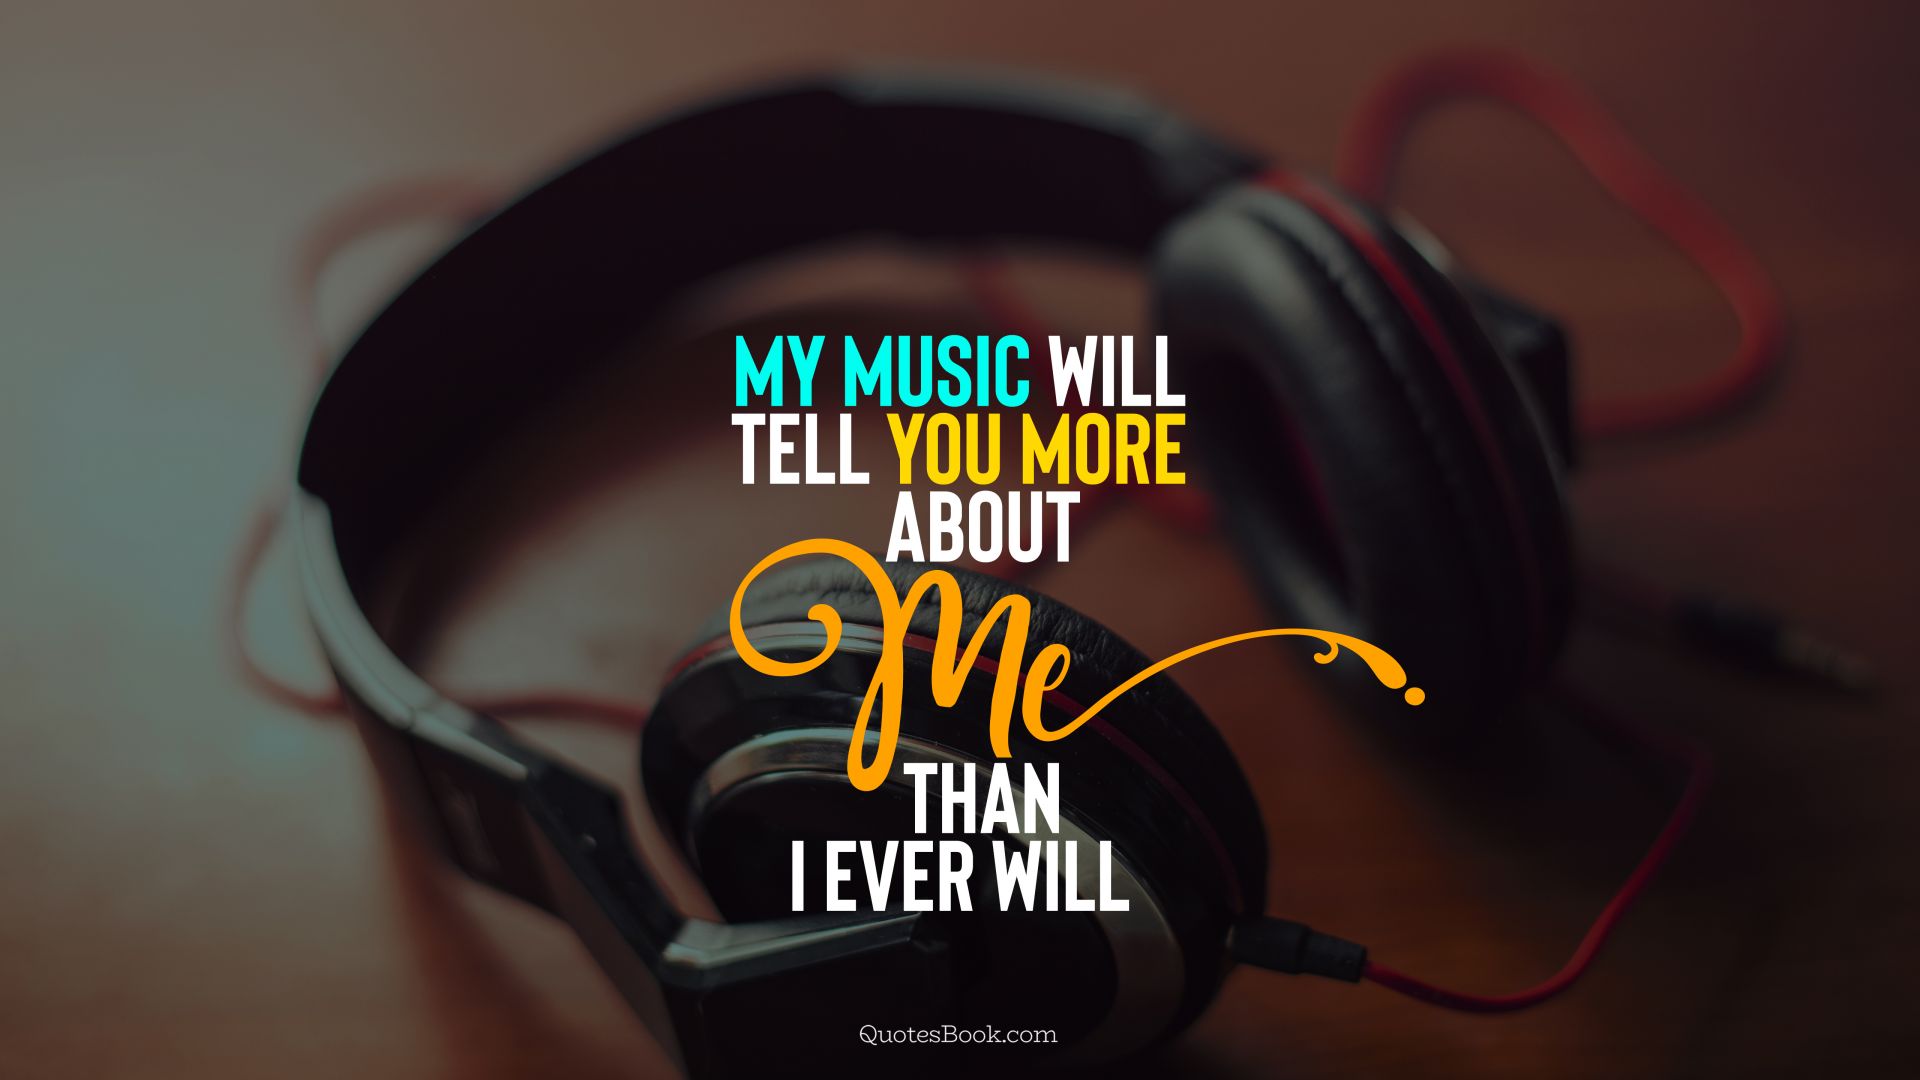 My music will tell you more about me than I ever will